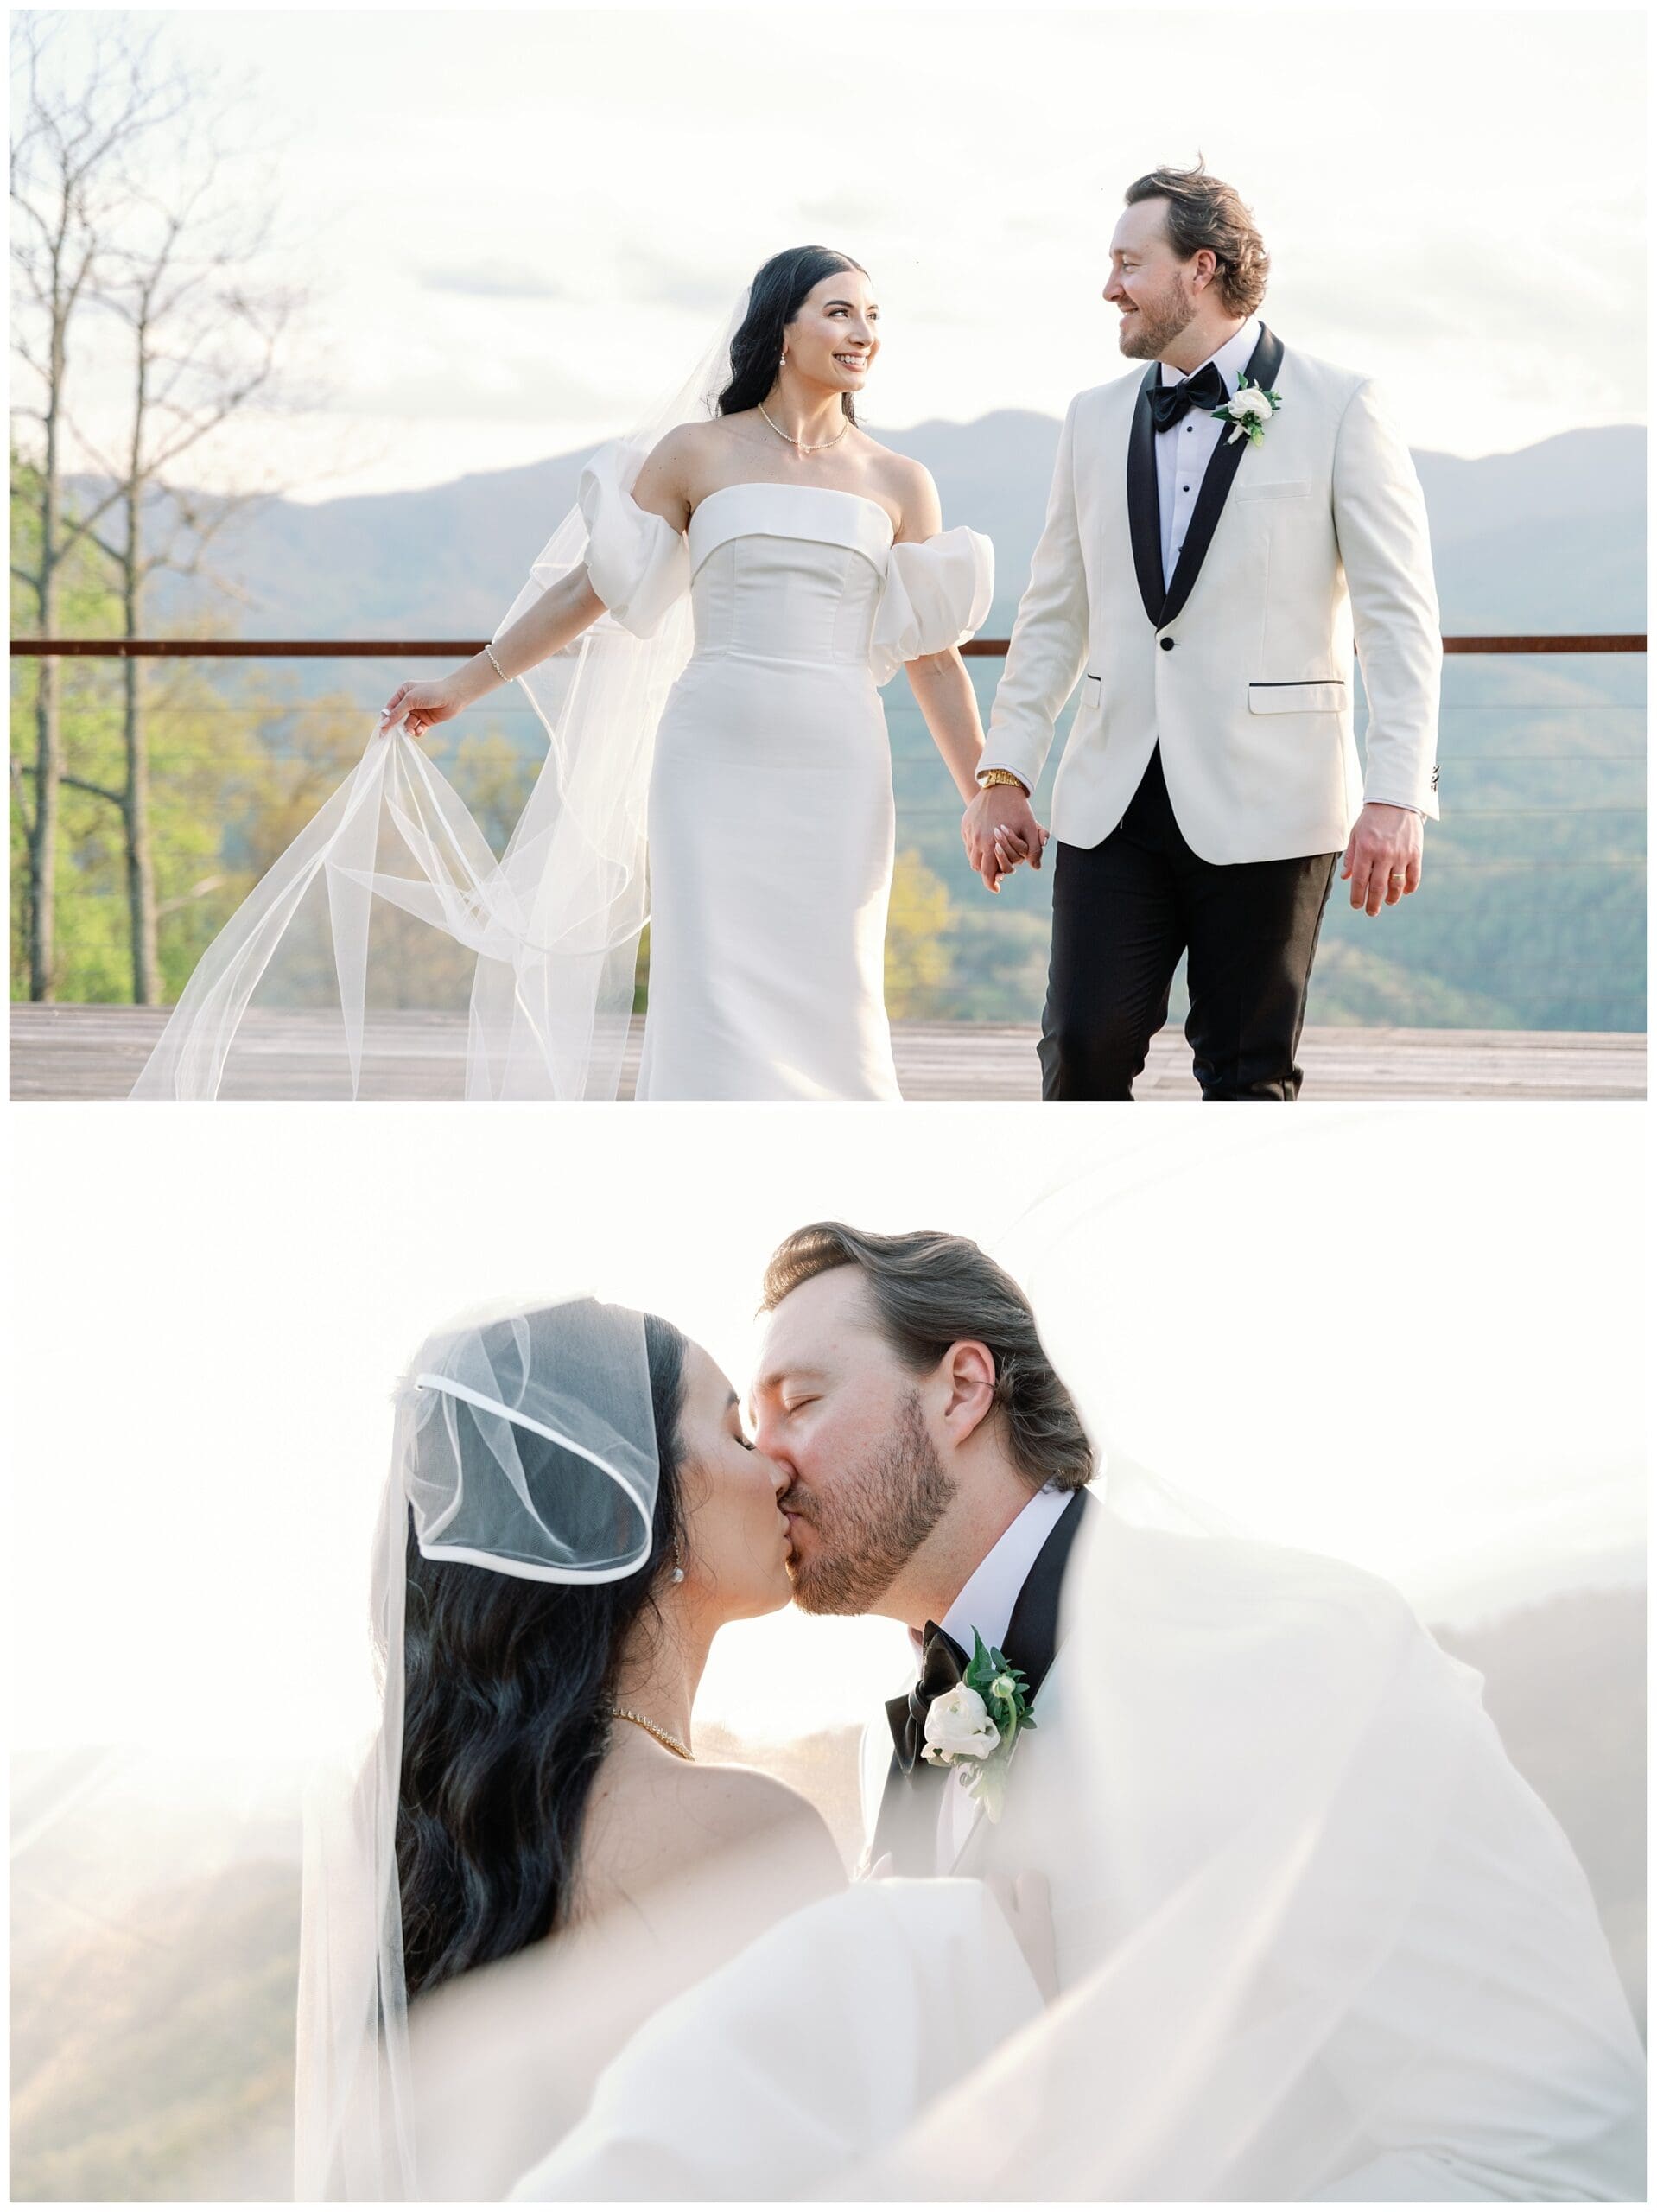 A bride and groom, in elegant wedding attire, joyfully interact in a mountainous setting, with one image showing them walking and smiling, and the other capturing a close-up kiss.